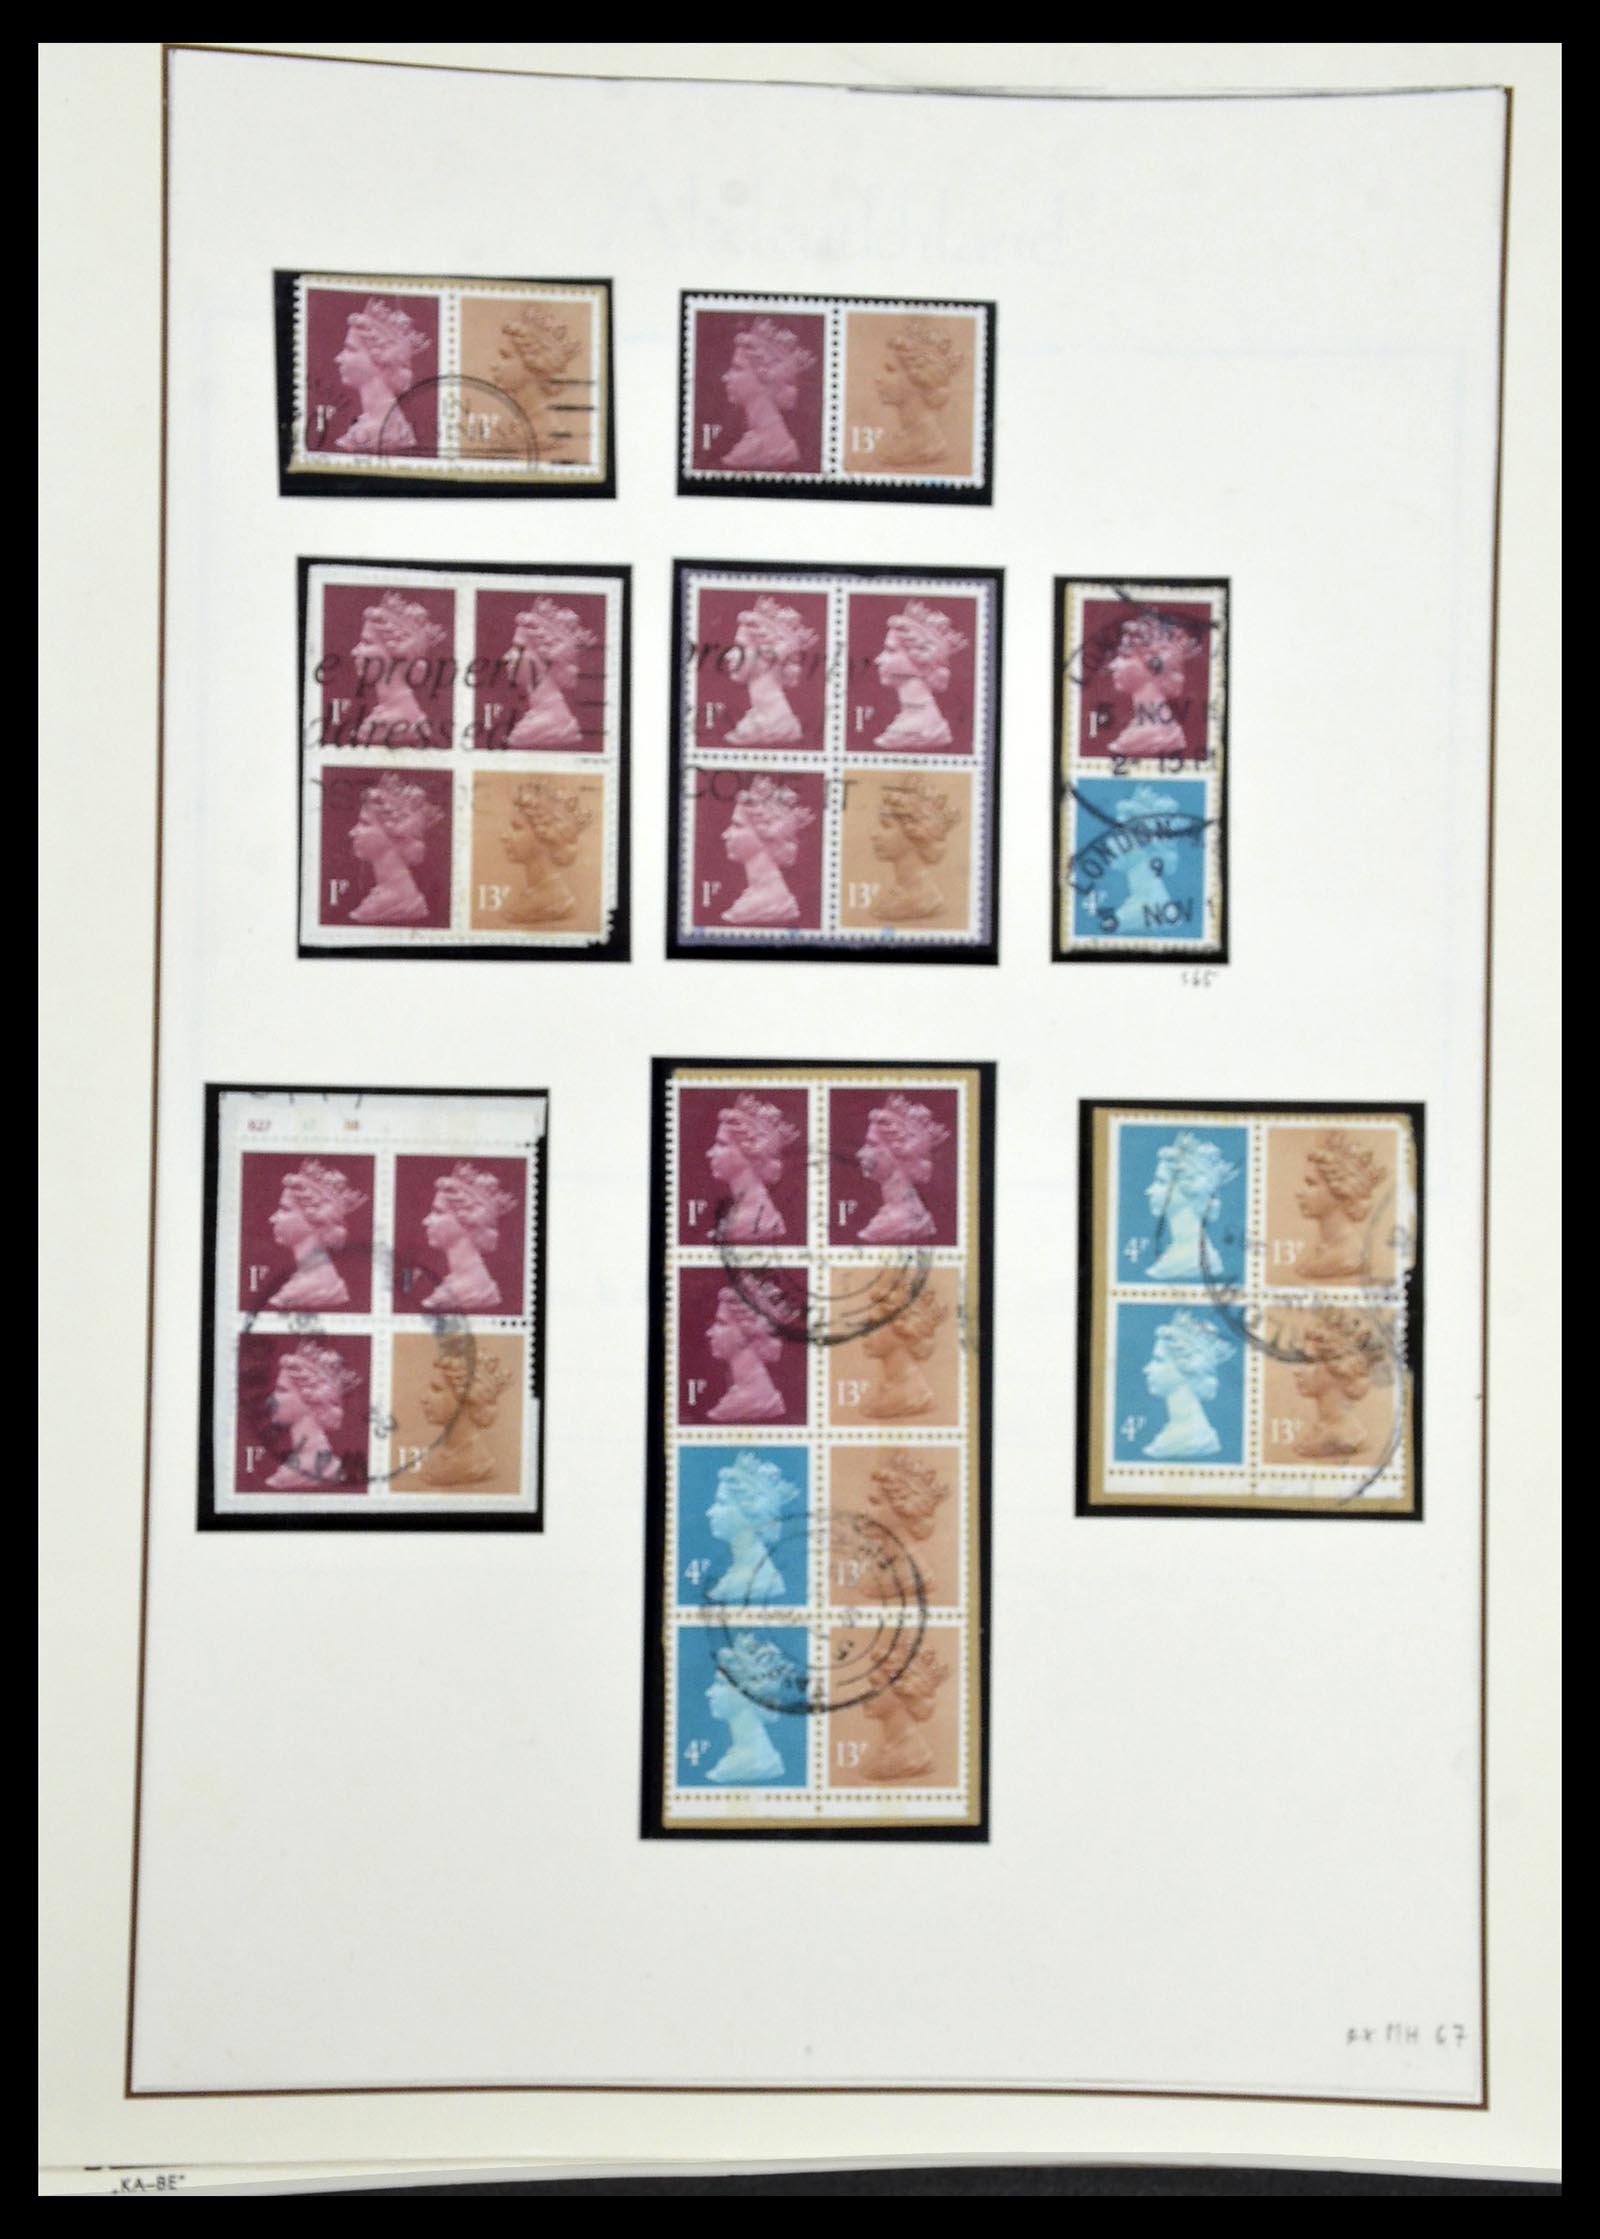 34221 202 - Stamp collection 34221 Great Britain Machins/castles 1971-2005.